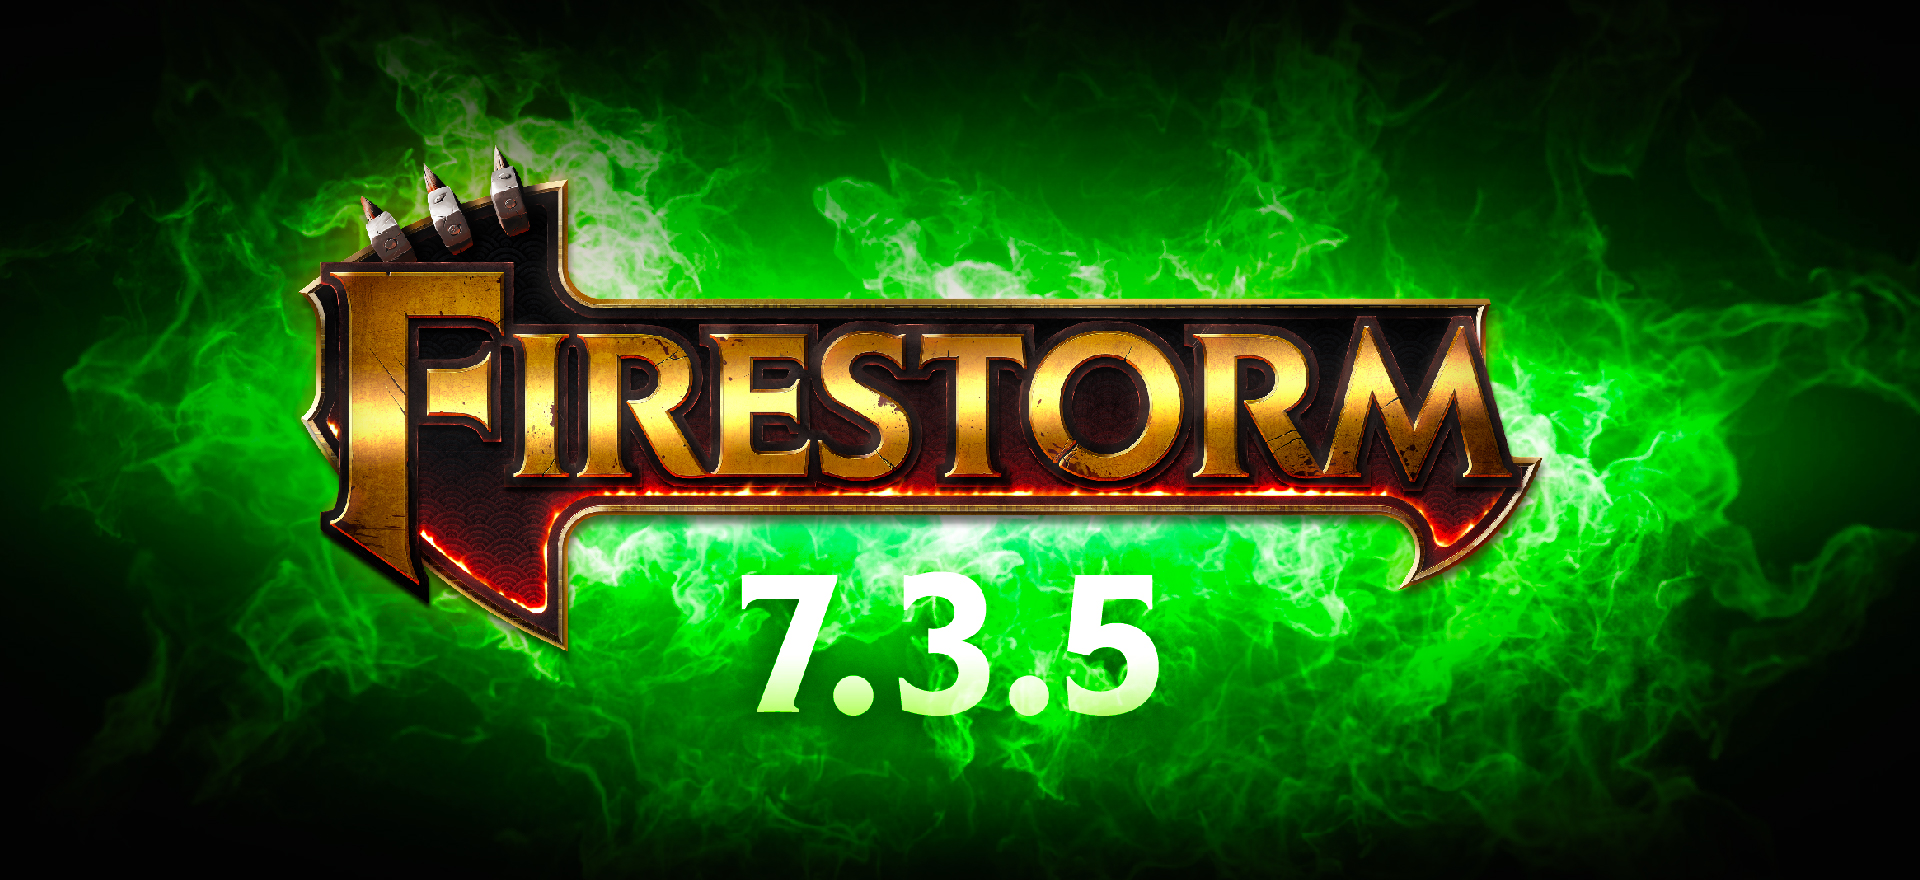 firestorm wow private troubleshooting